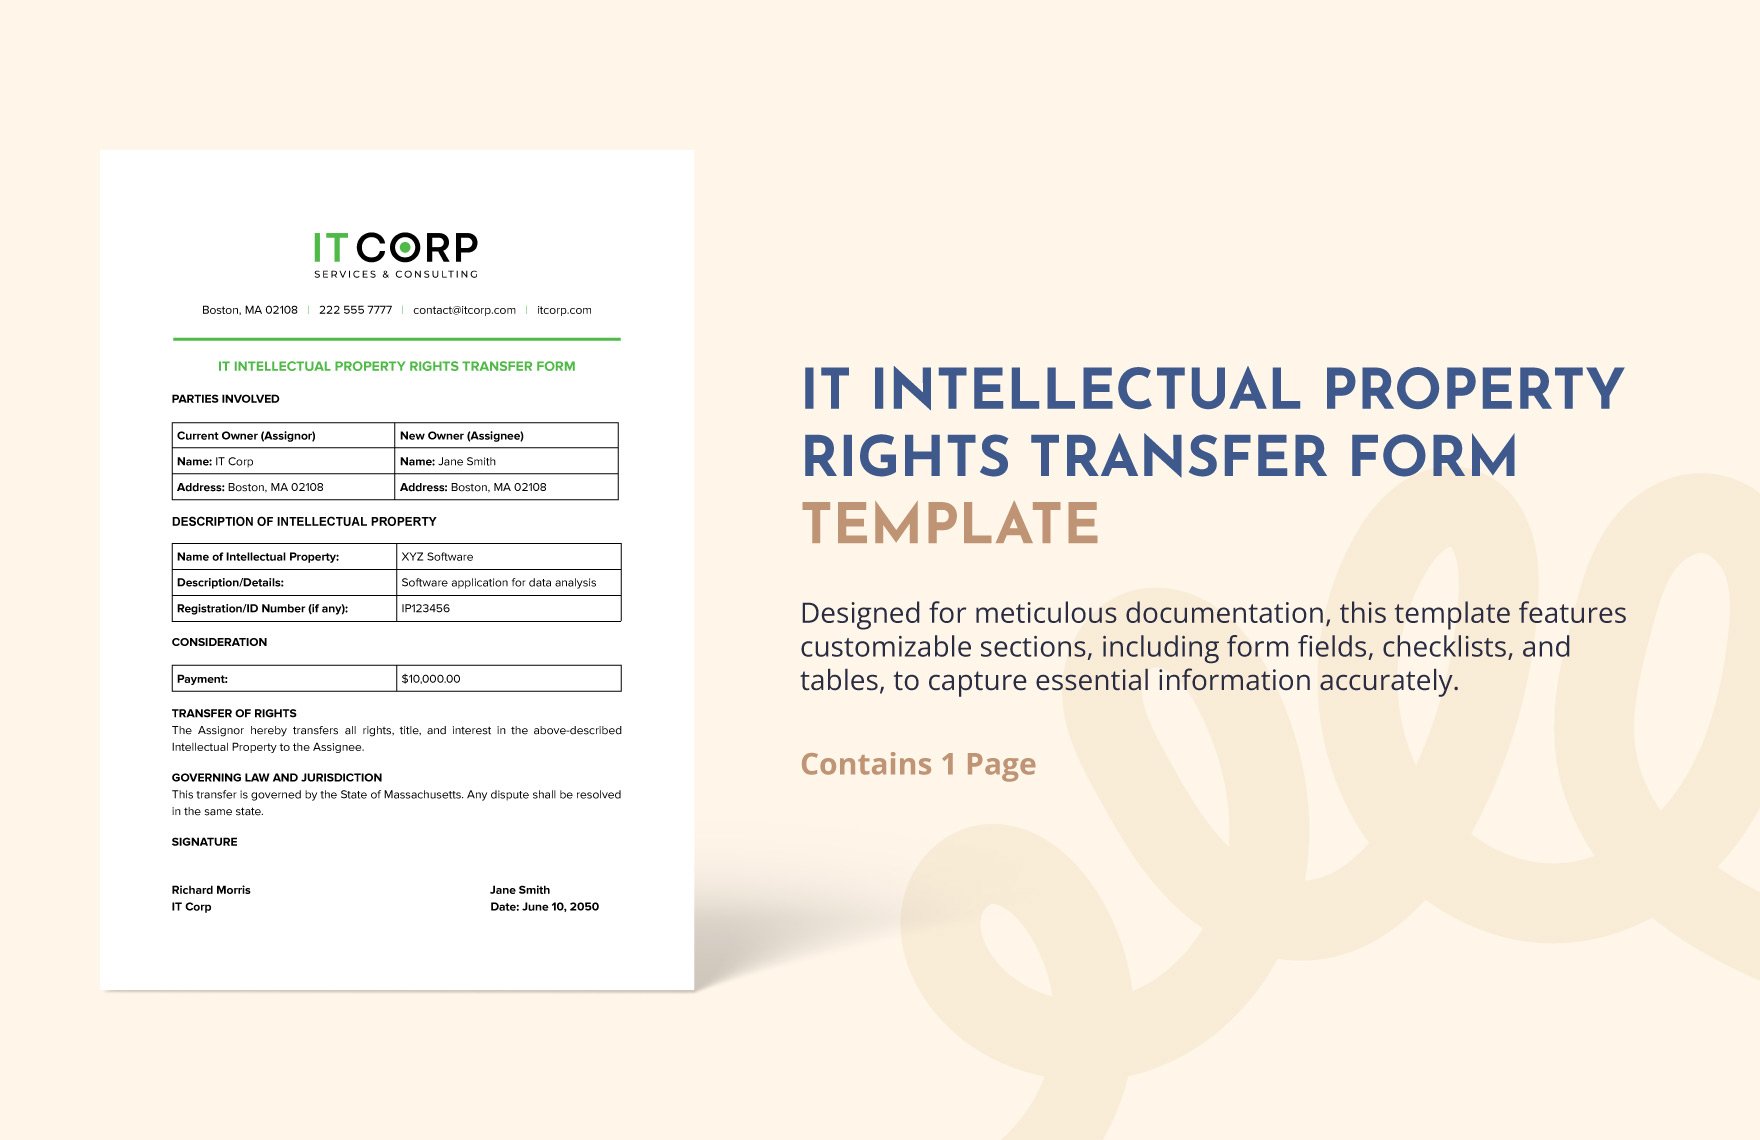 IT Intellectual Property Rights Transfer Form Template in Word, Google Docs, PDF